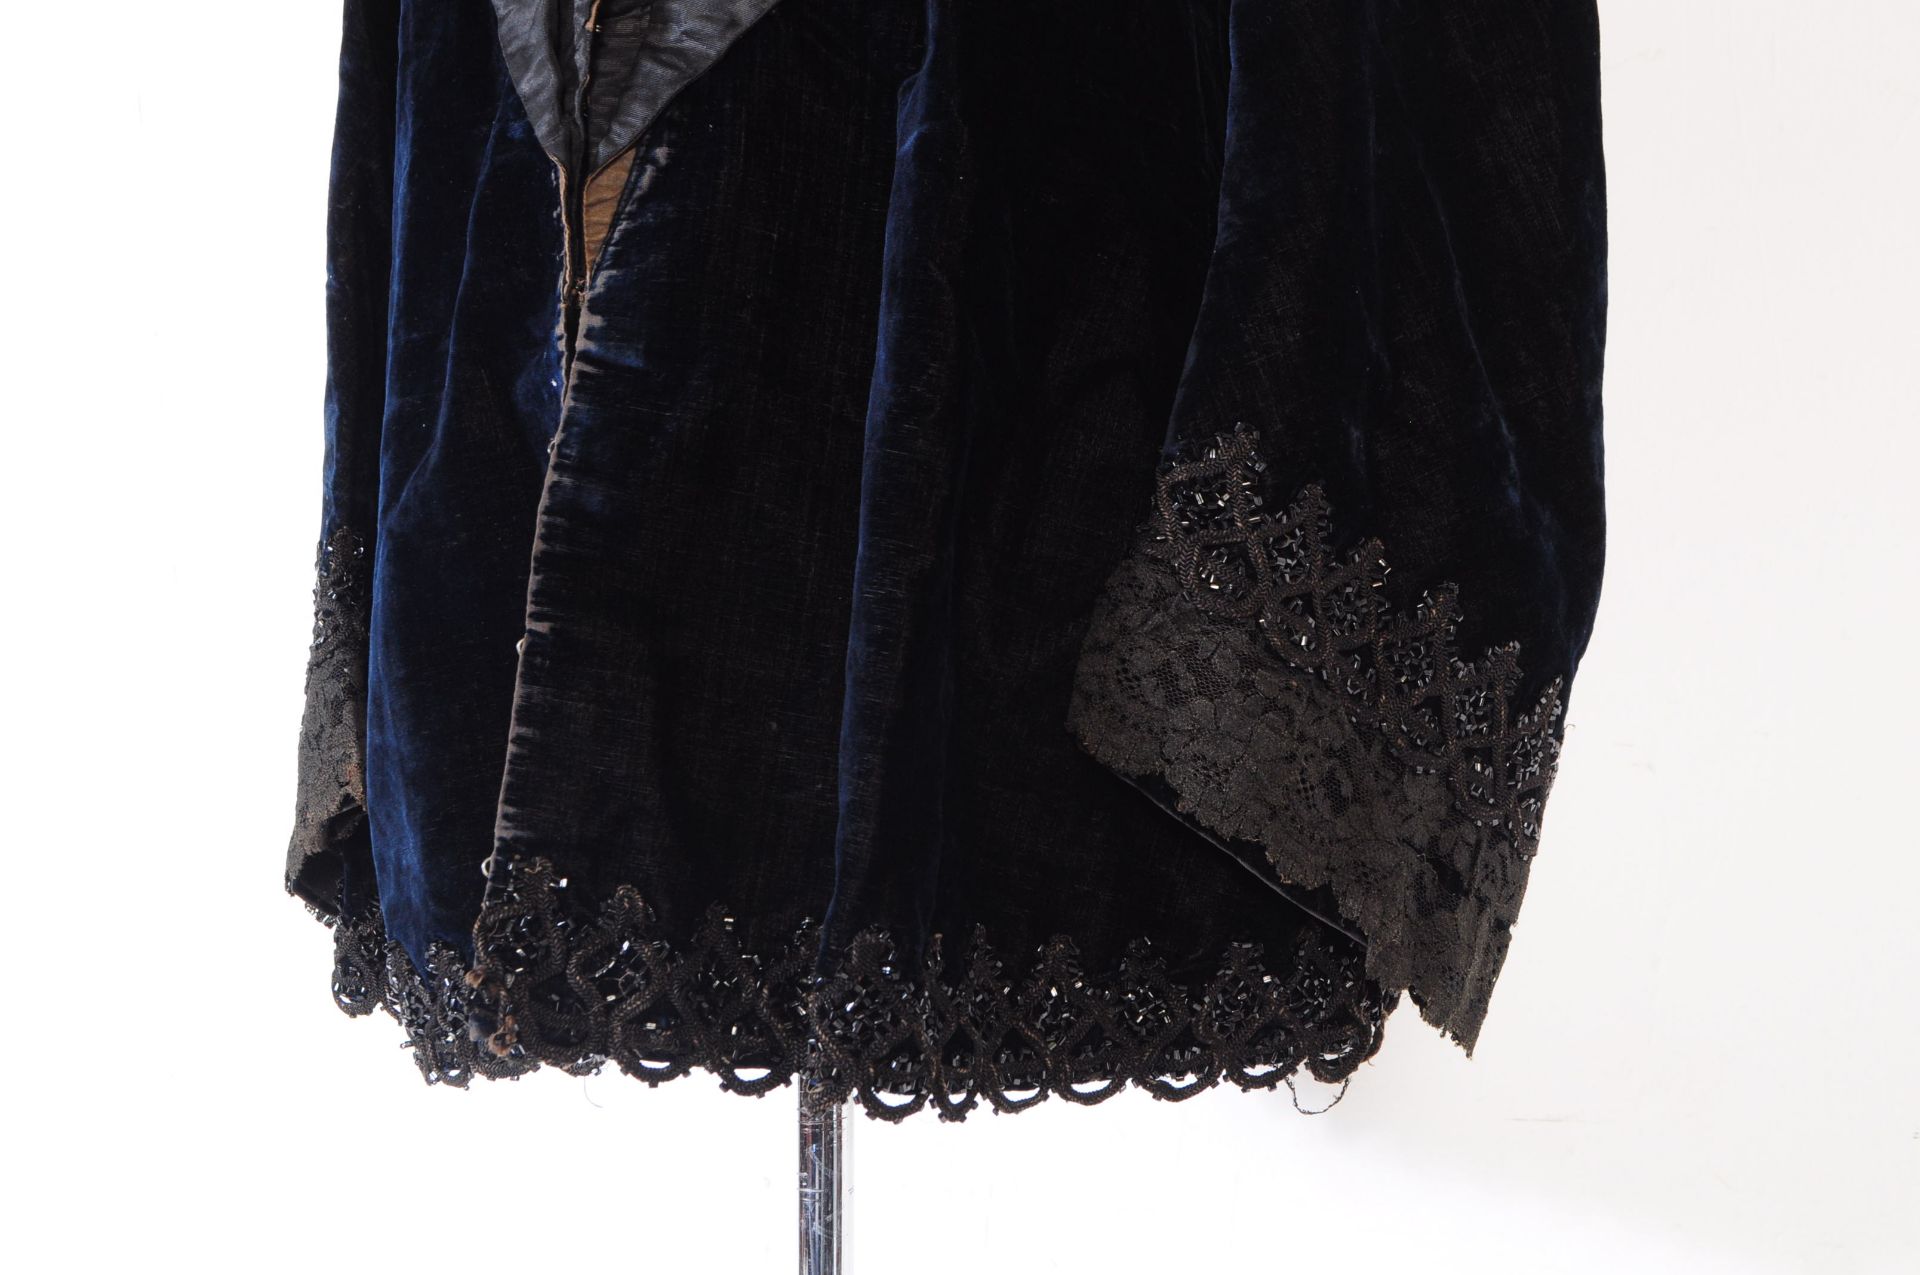 TWO VICTORIAN CLOTHING ITEMS - VELVET CAPE & SHIRT - Image 7 of 12